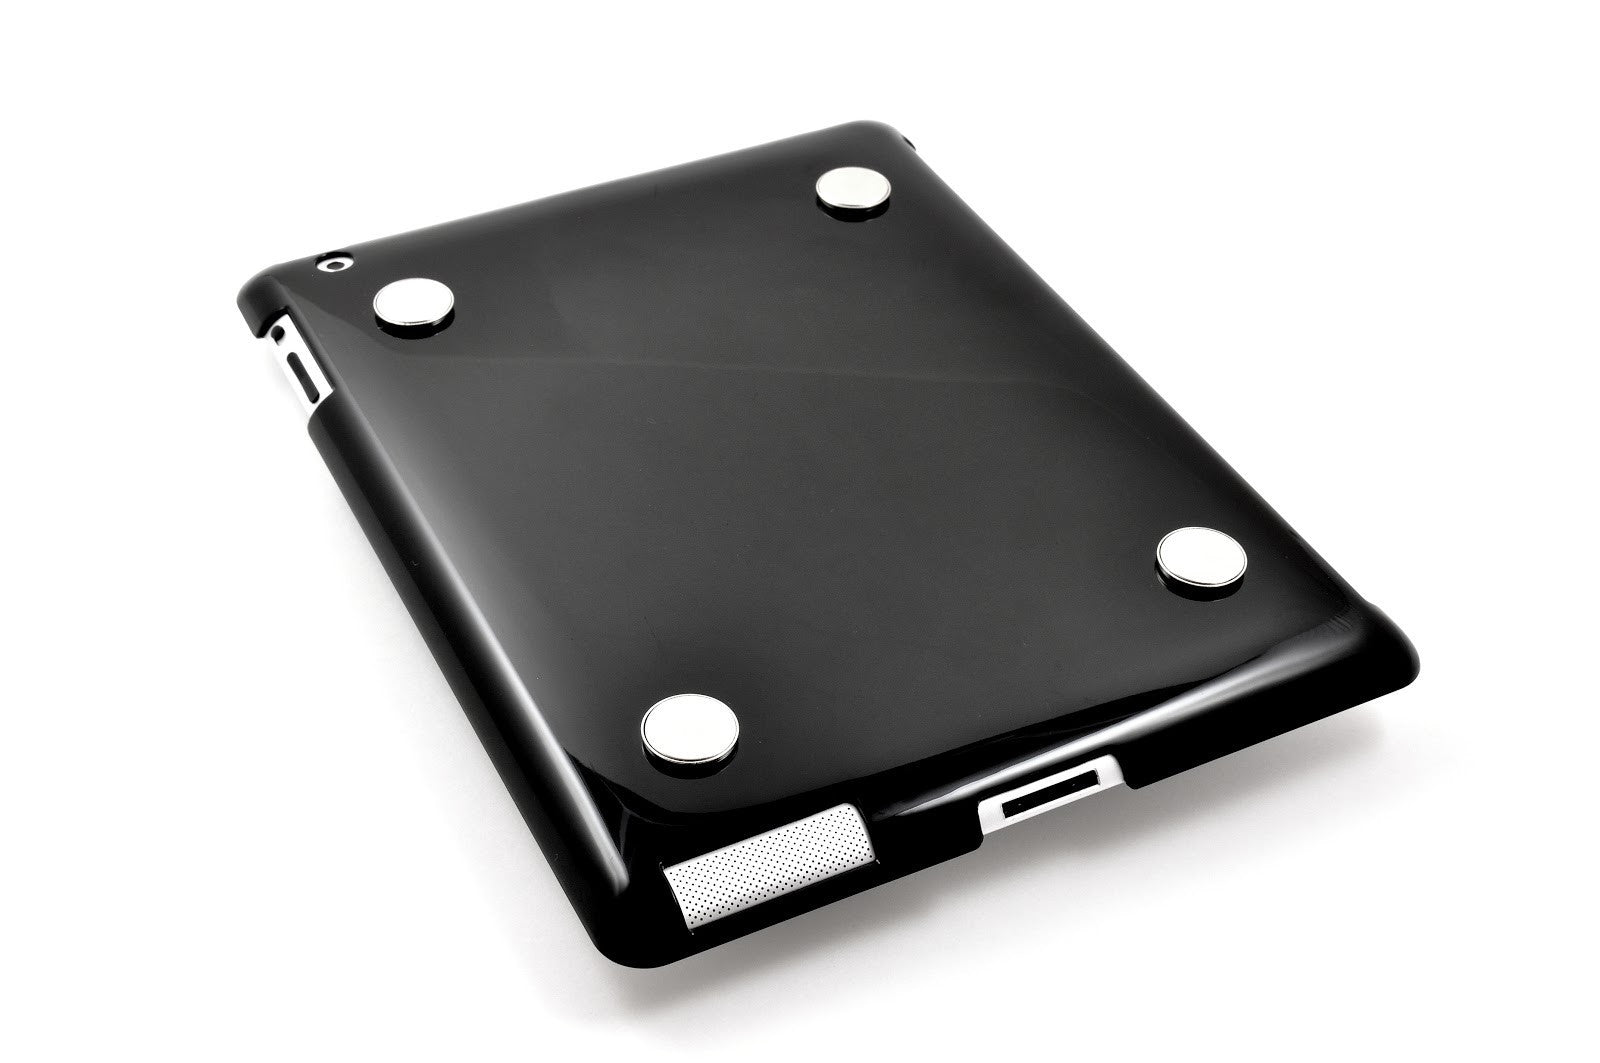 Black iPad plastic snap-on case/cover with magnets